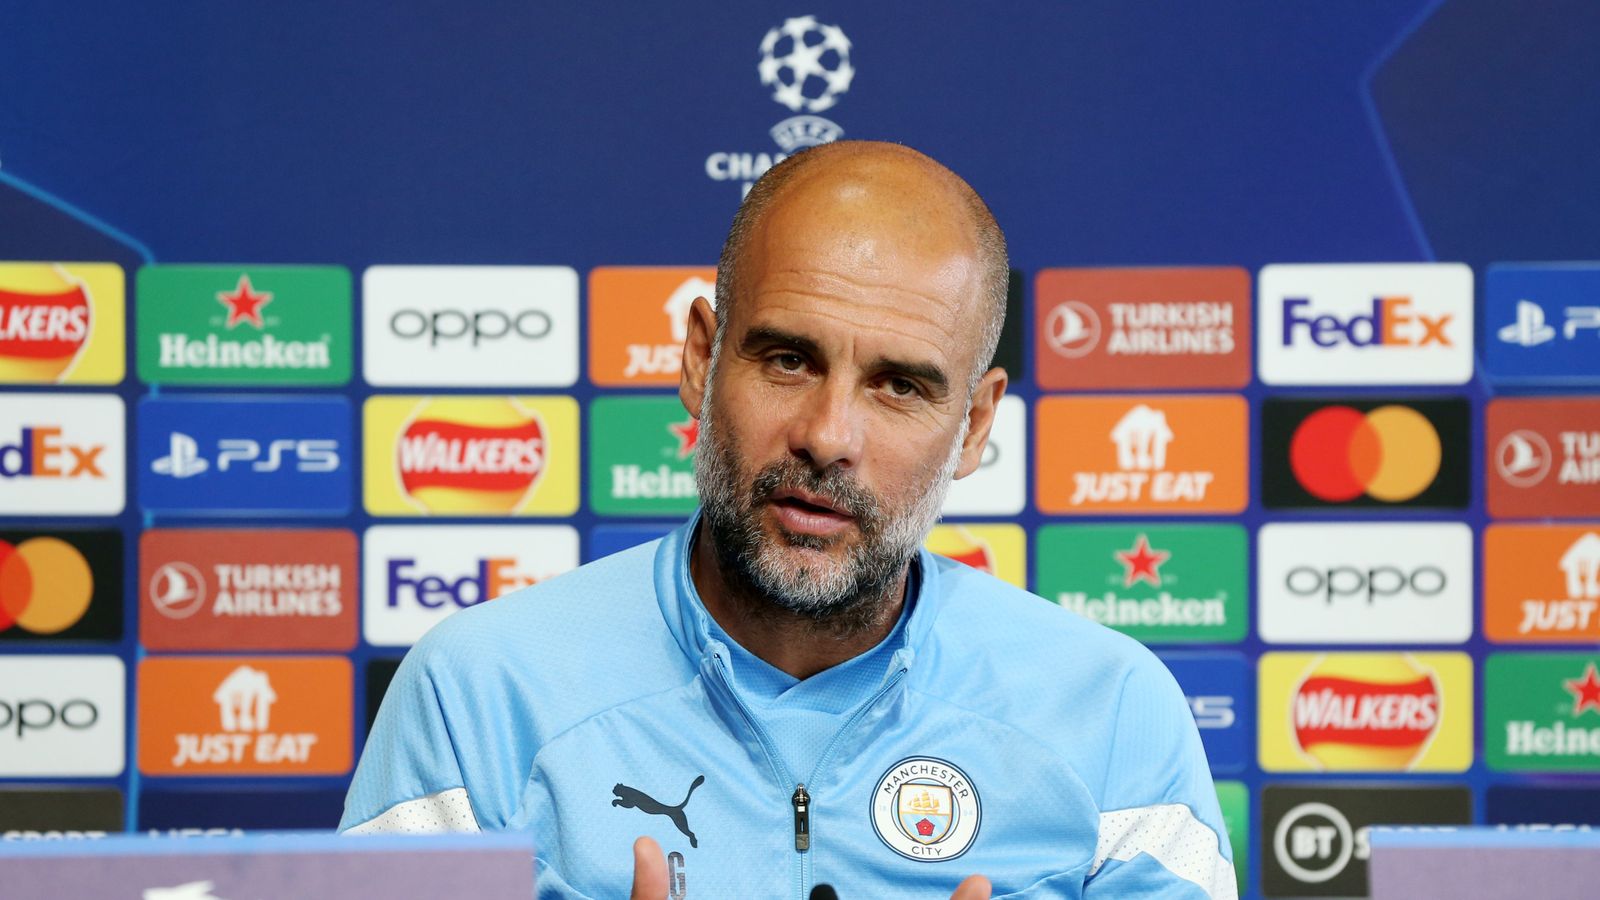 Pep Guardiola: Man City boss says managers overrated compared to players and that Erling Haaland can still improve